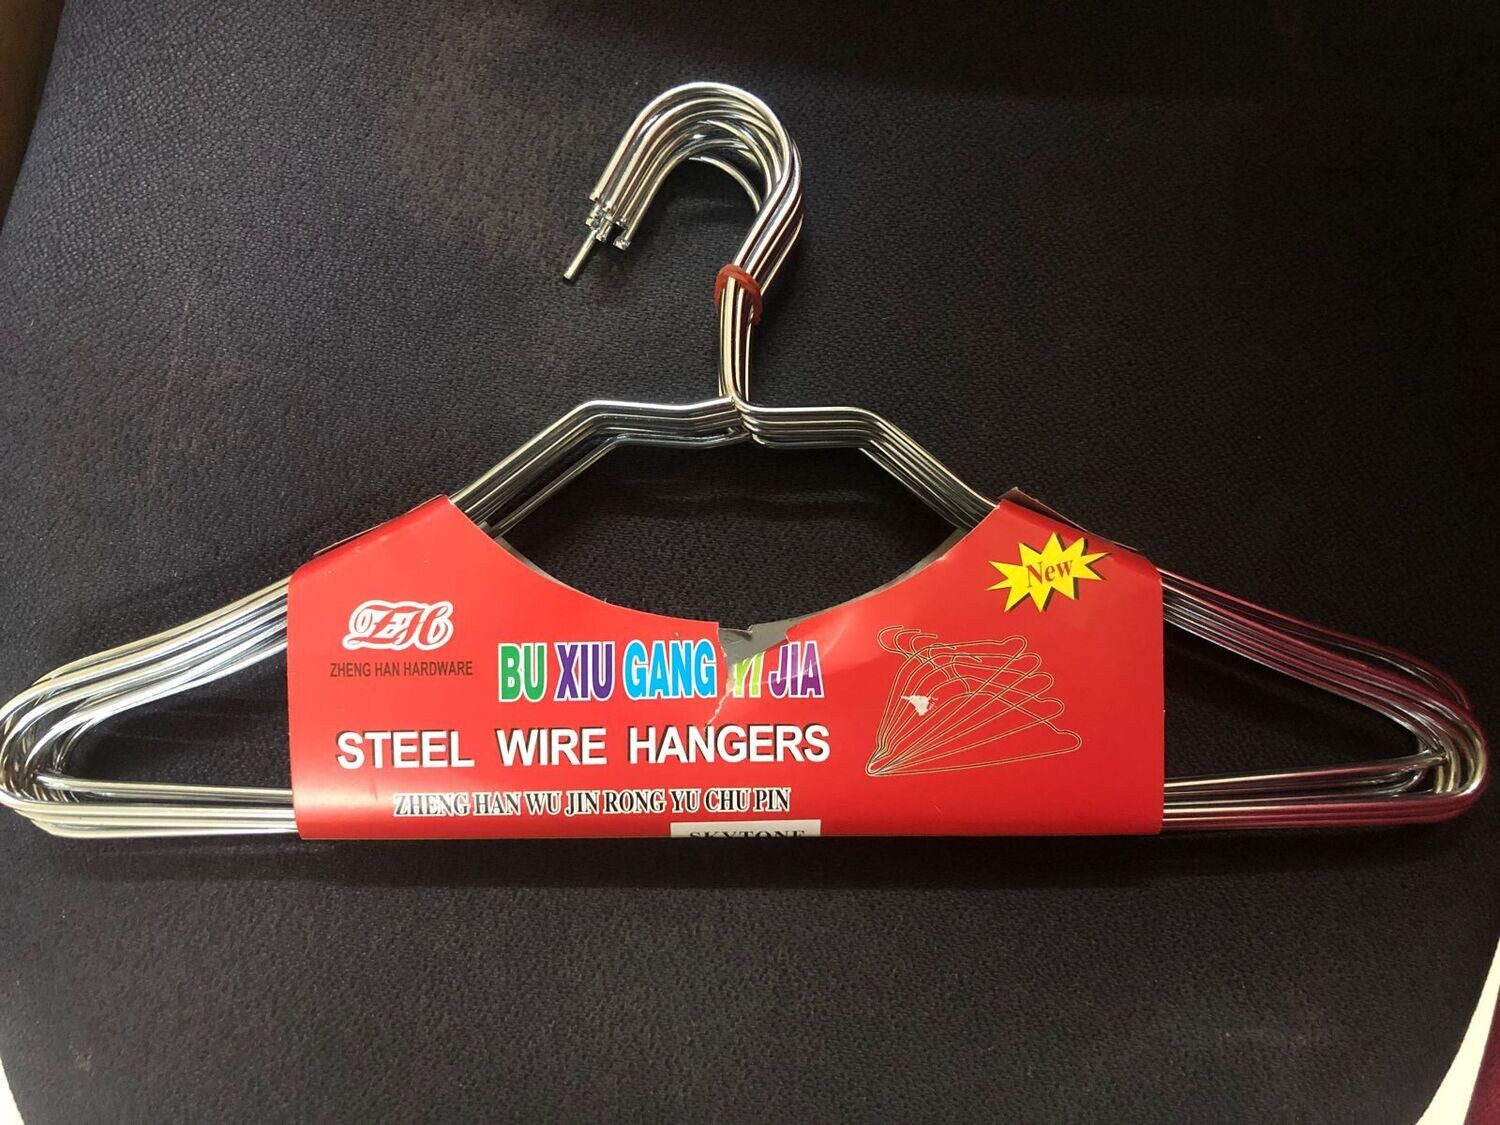 Stainless Steel Clothes Hanger - 10 pieces